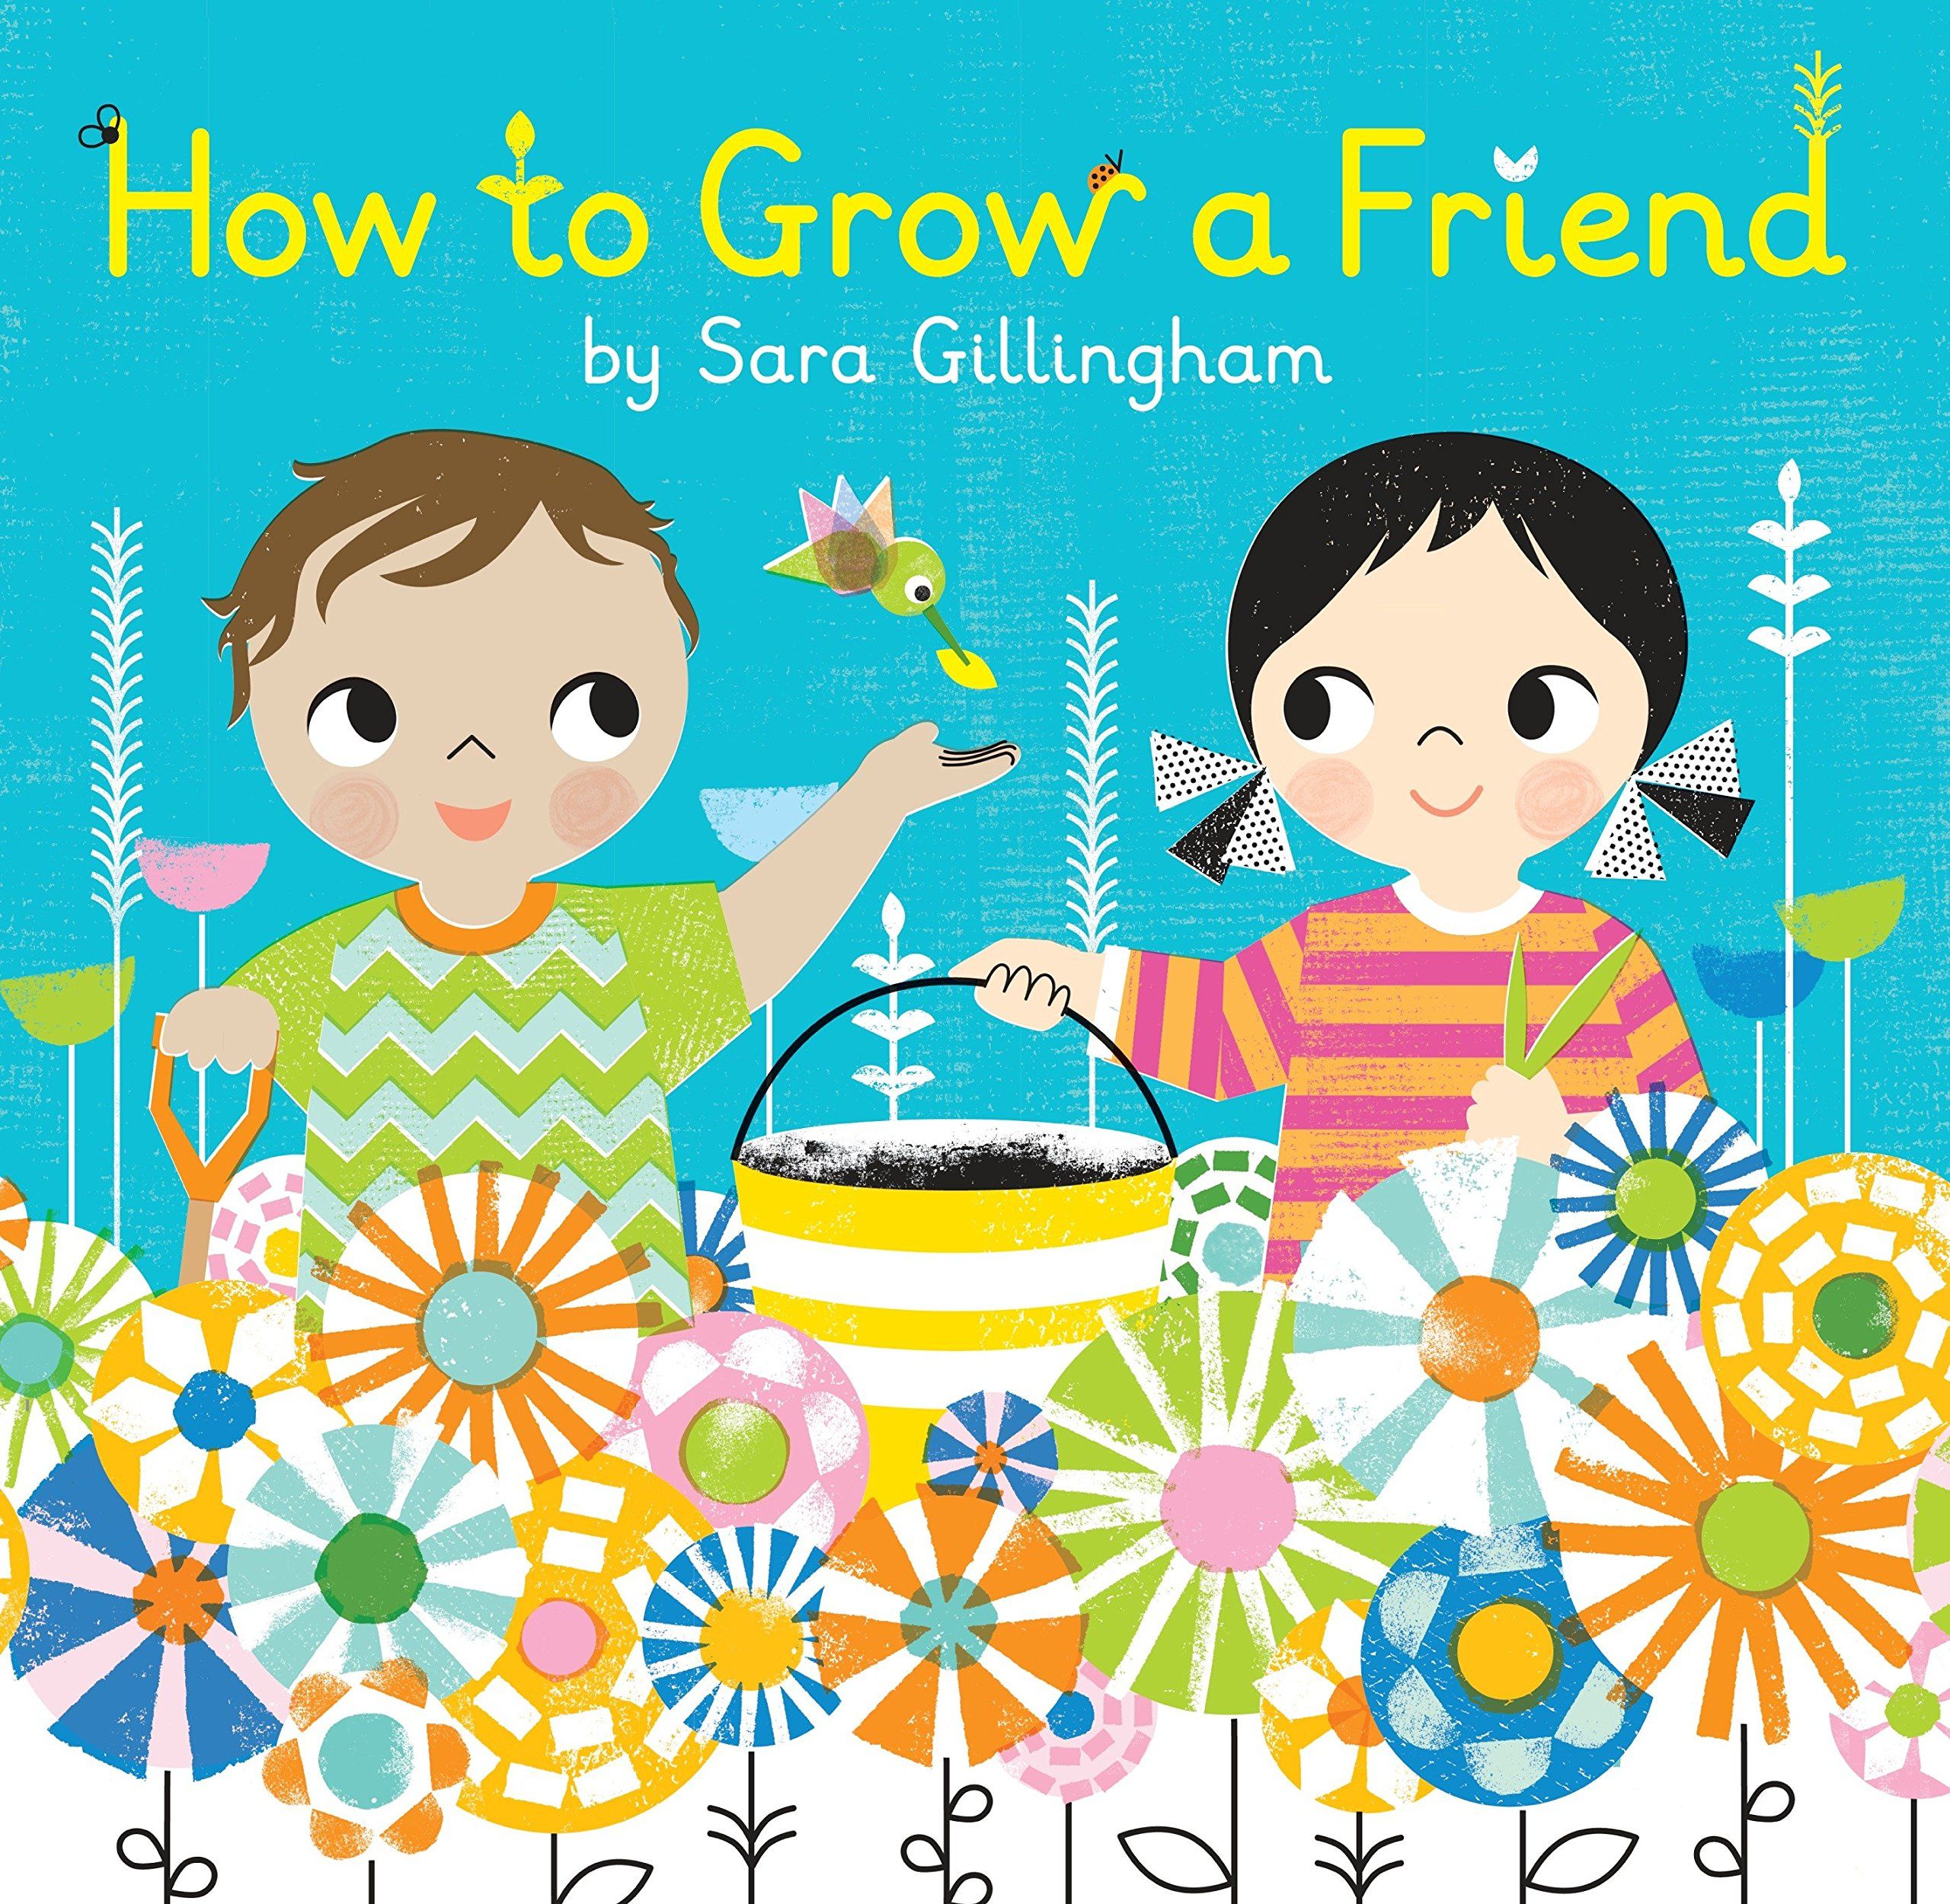 How to Grow a Friend book cover